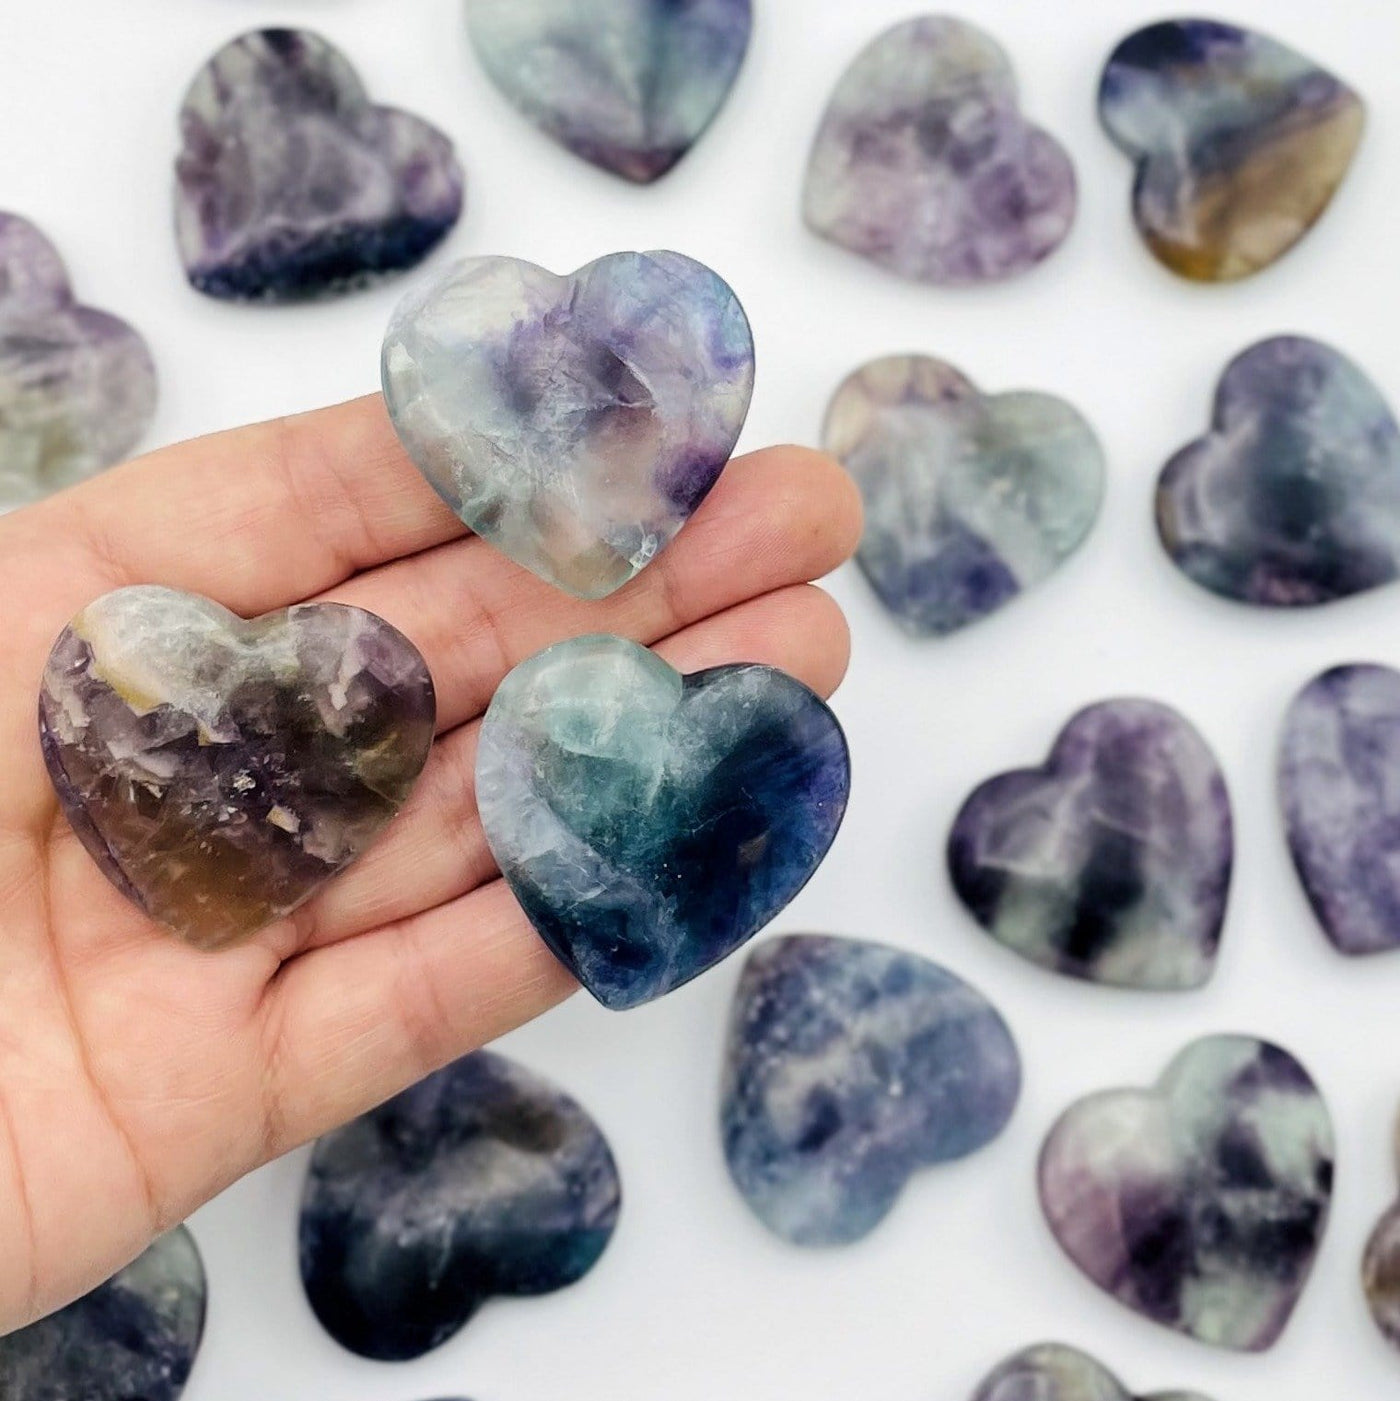 Fluorite Hearts displayed in hand for size reference